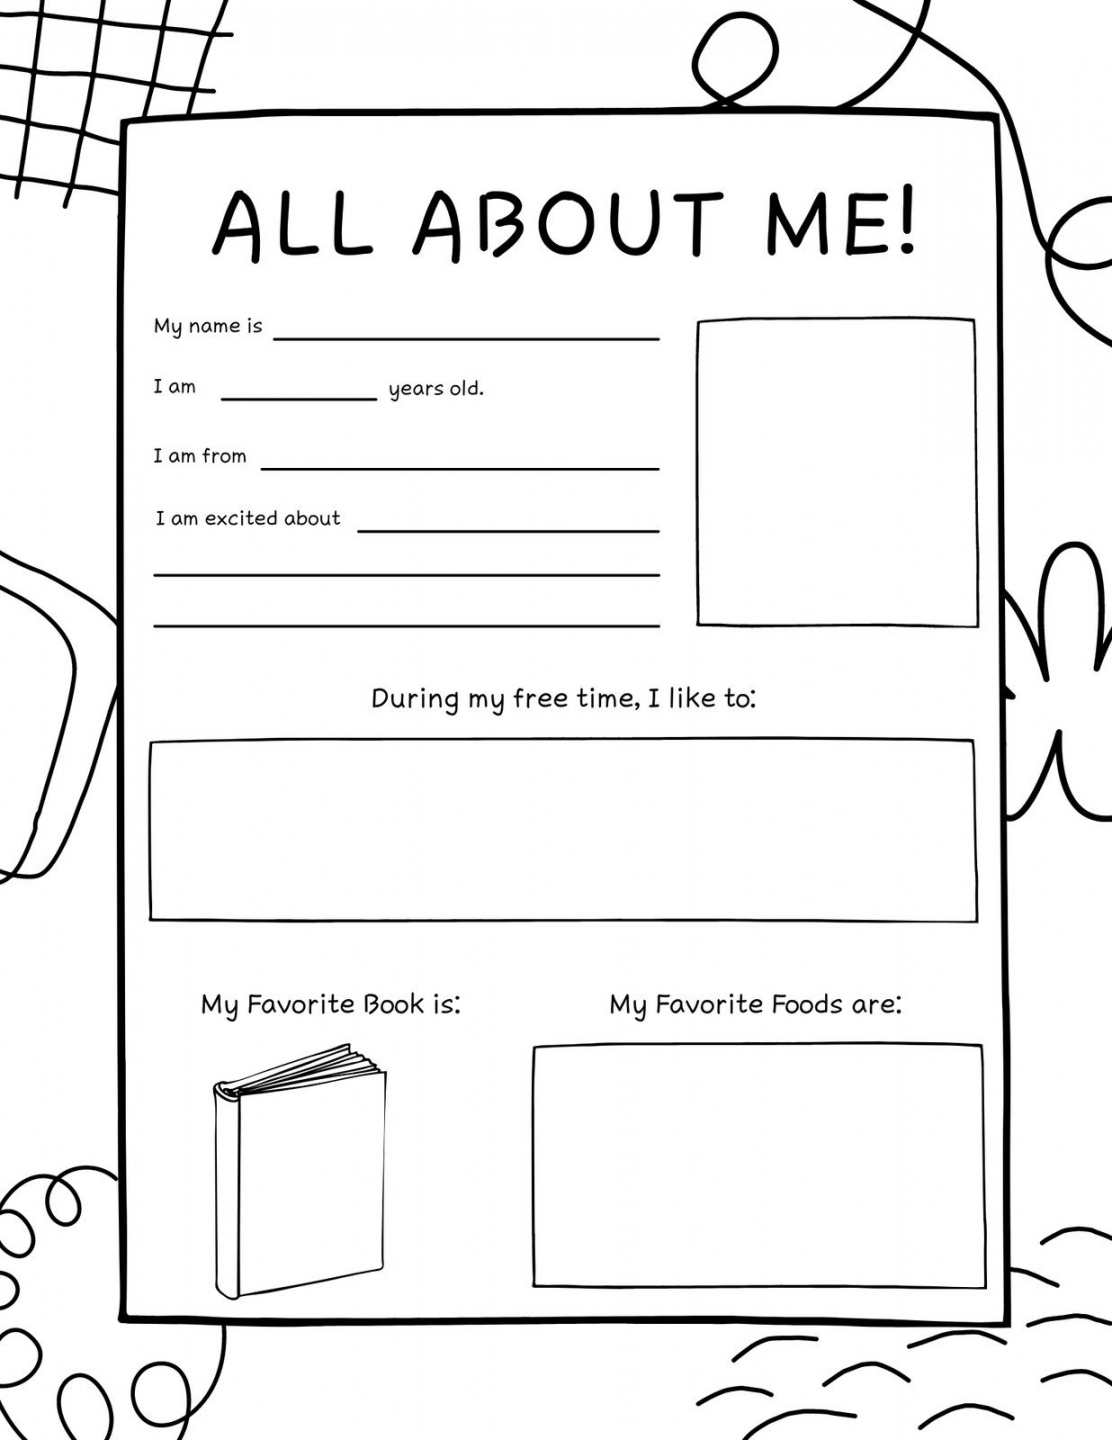 All About Me Free Printable - Printable - Free and printable All About Me worksheet templates  Canva